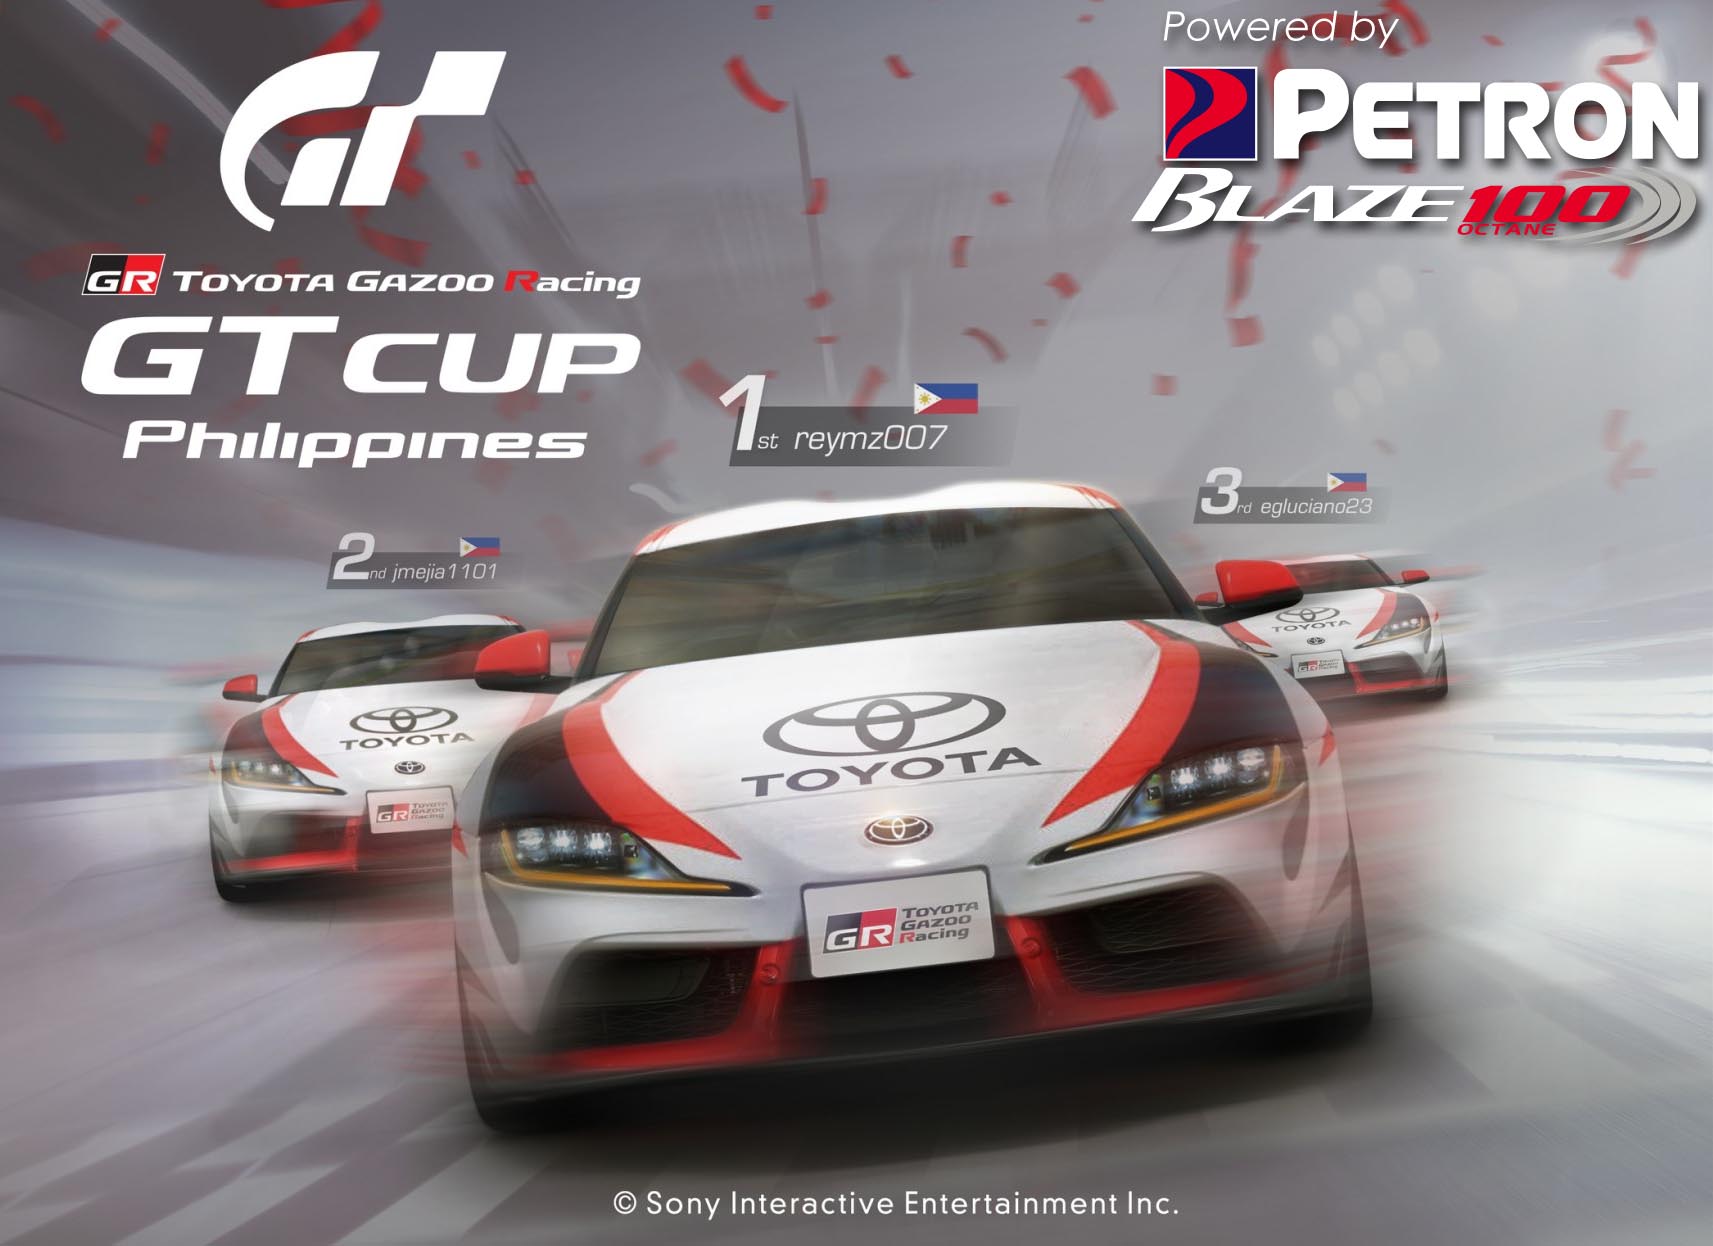 PETRON BLAZE 100 Supports Toyota GR GT Cup